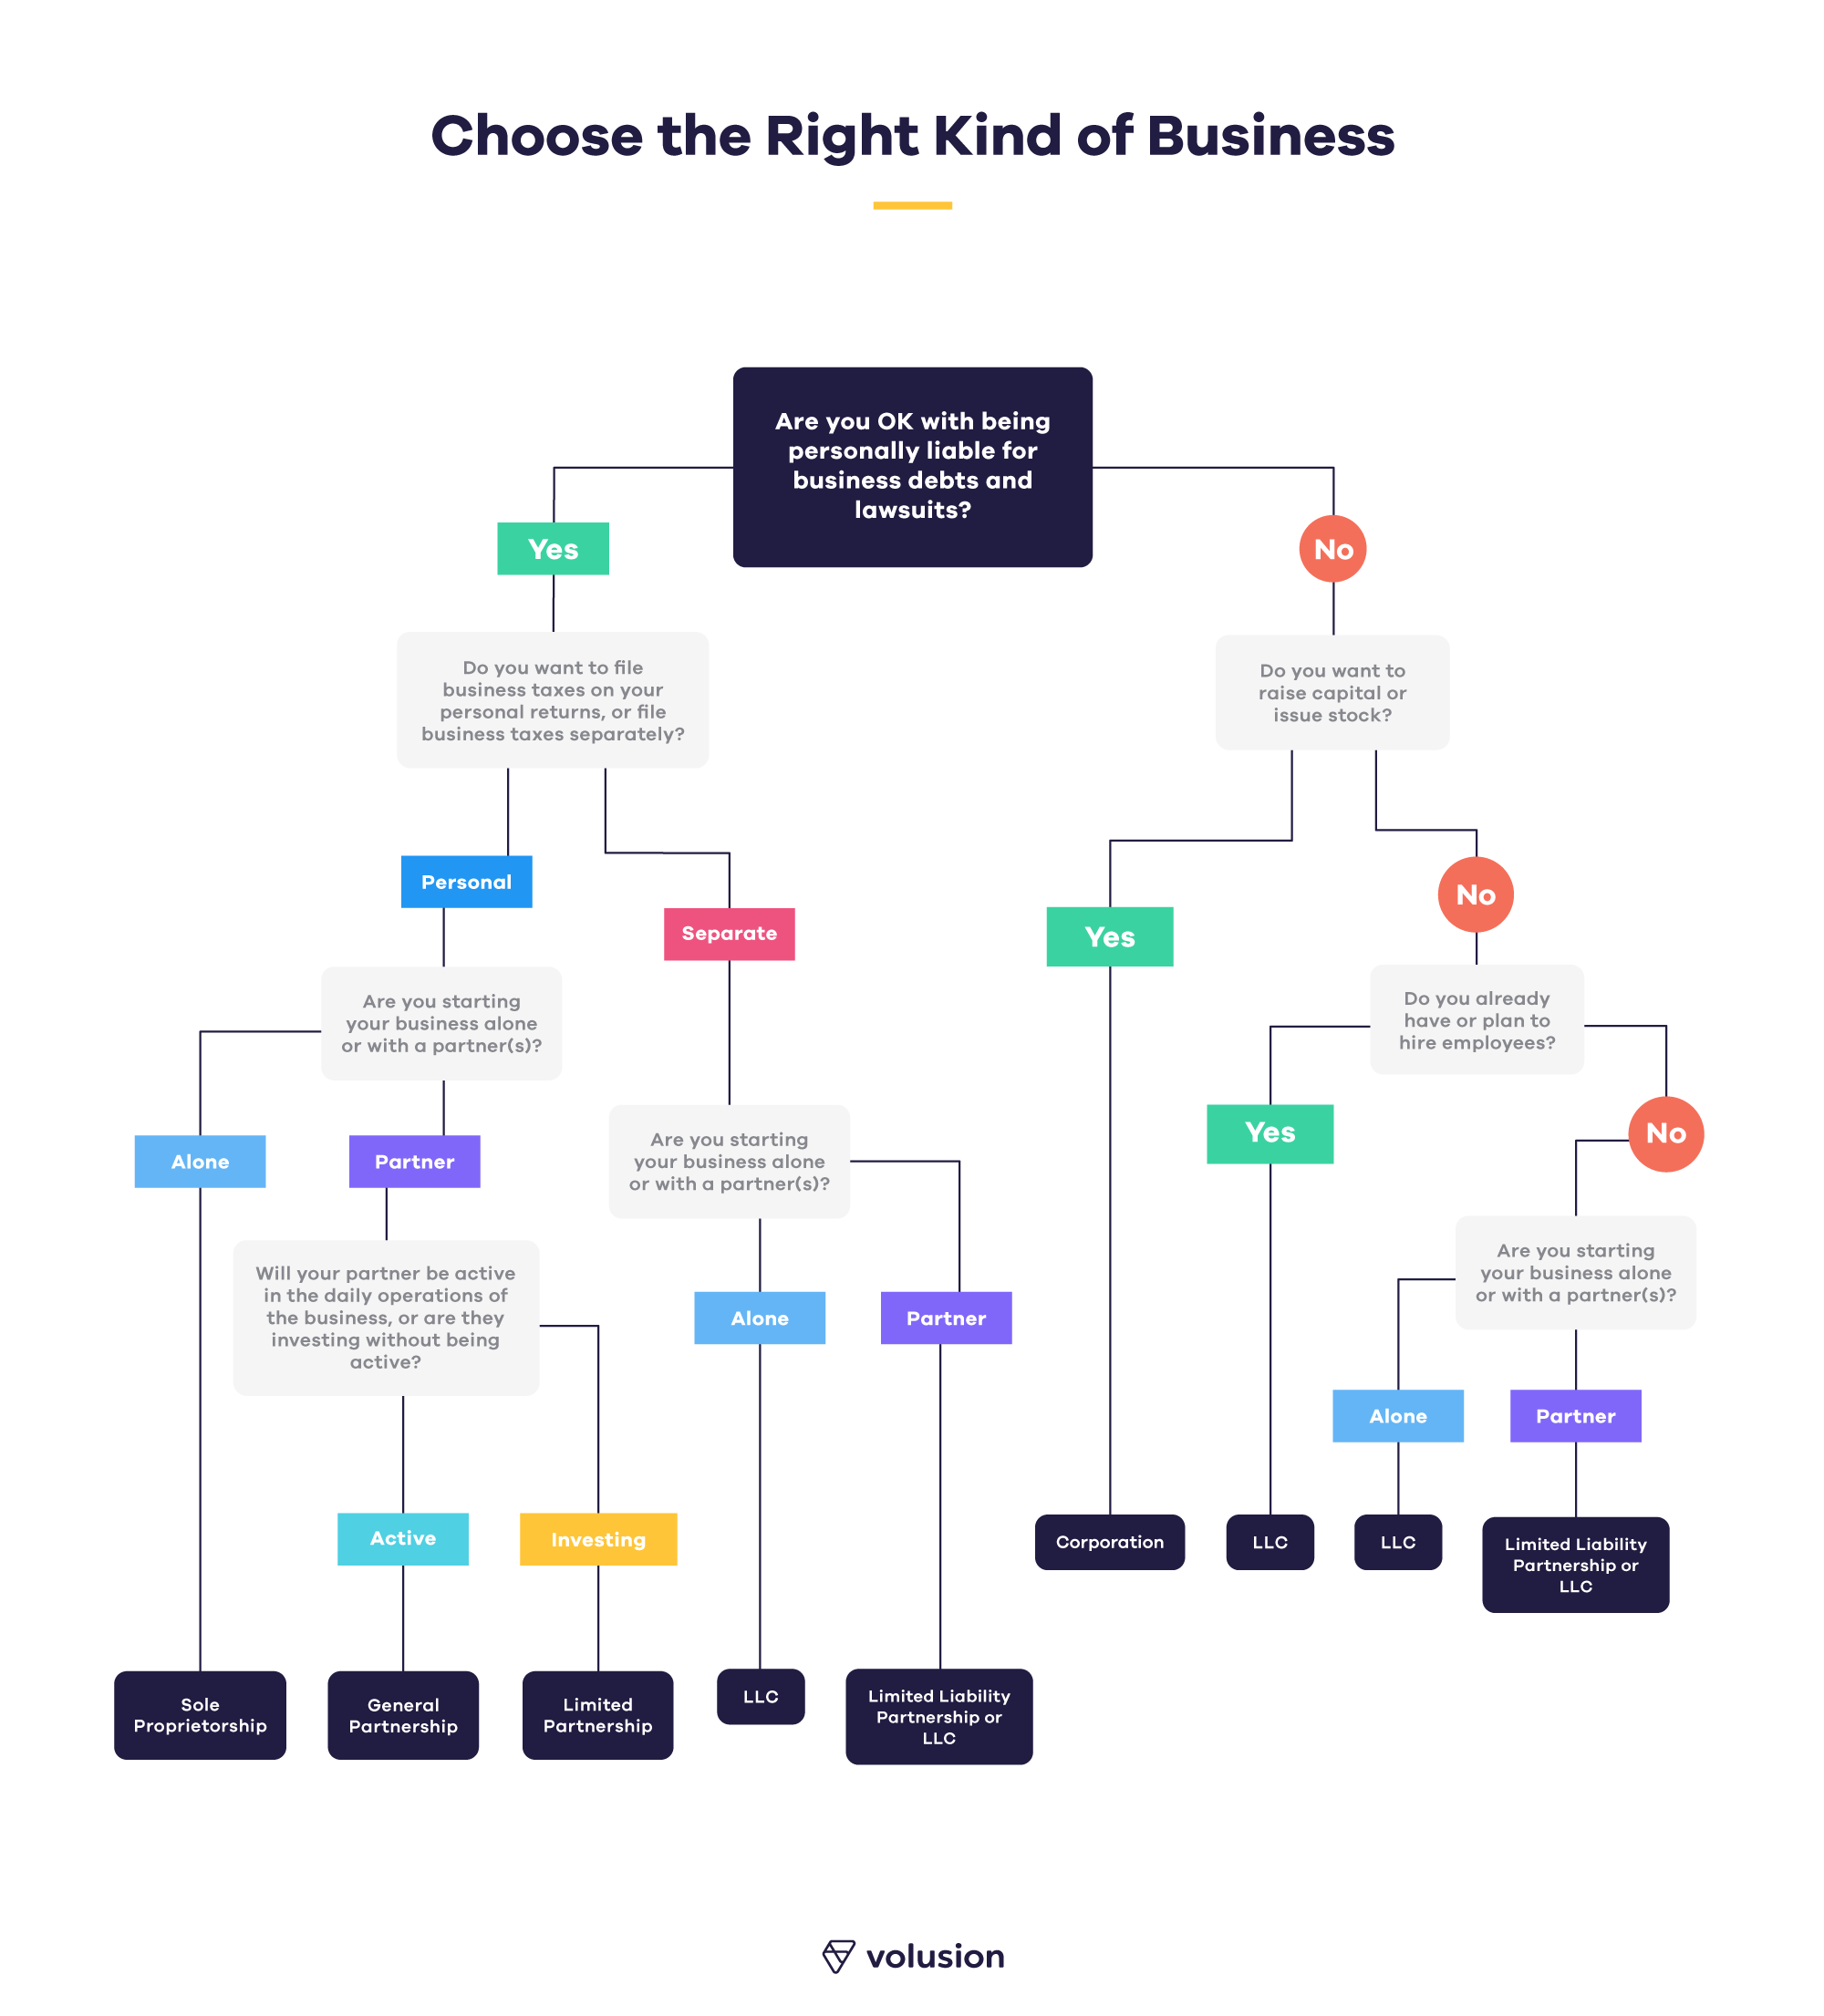 Choose the Right Kind of Business